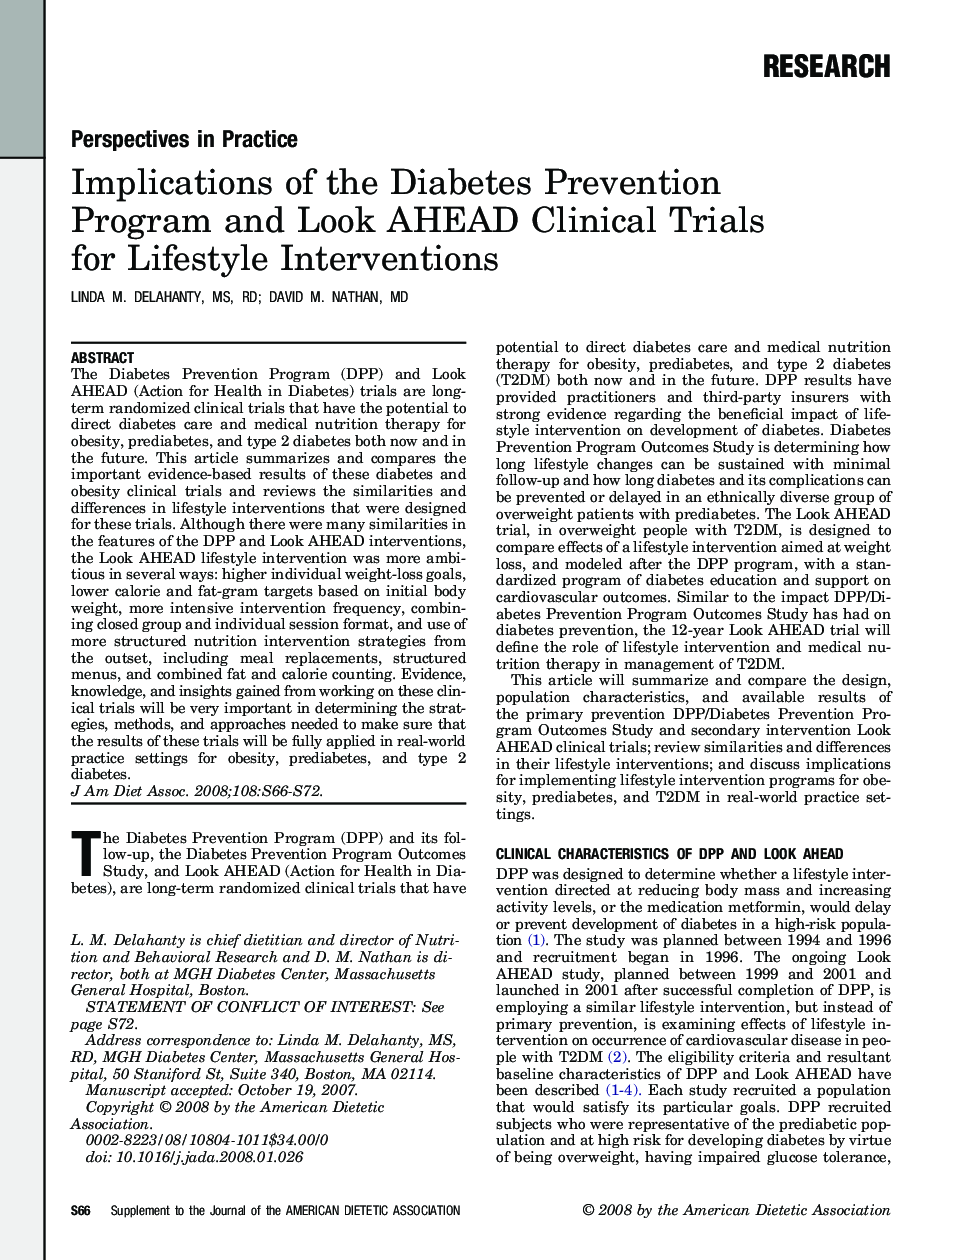 Implications of the Diabetes Prevention Program and Look AHEAD Clinical Trials for Lifestyle Interventions 